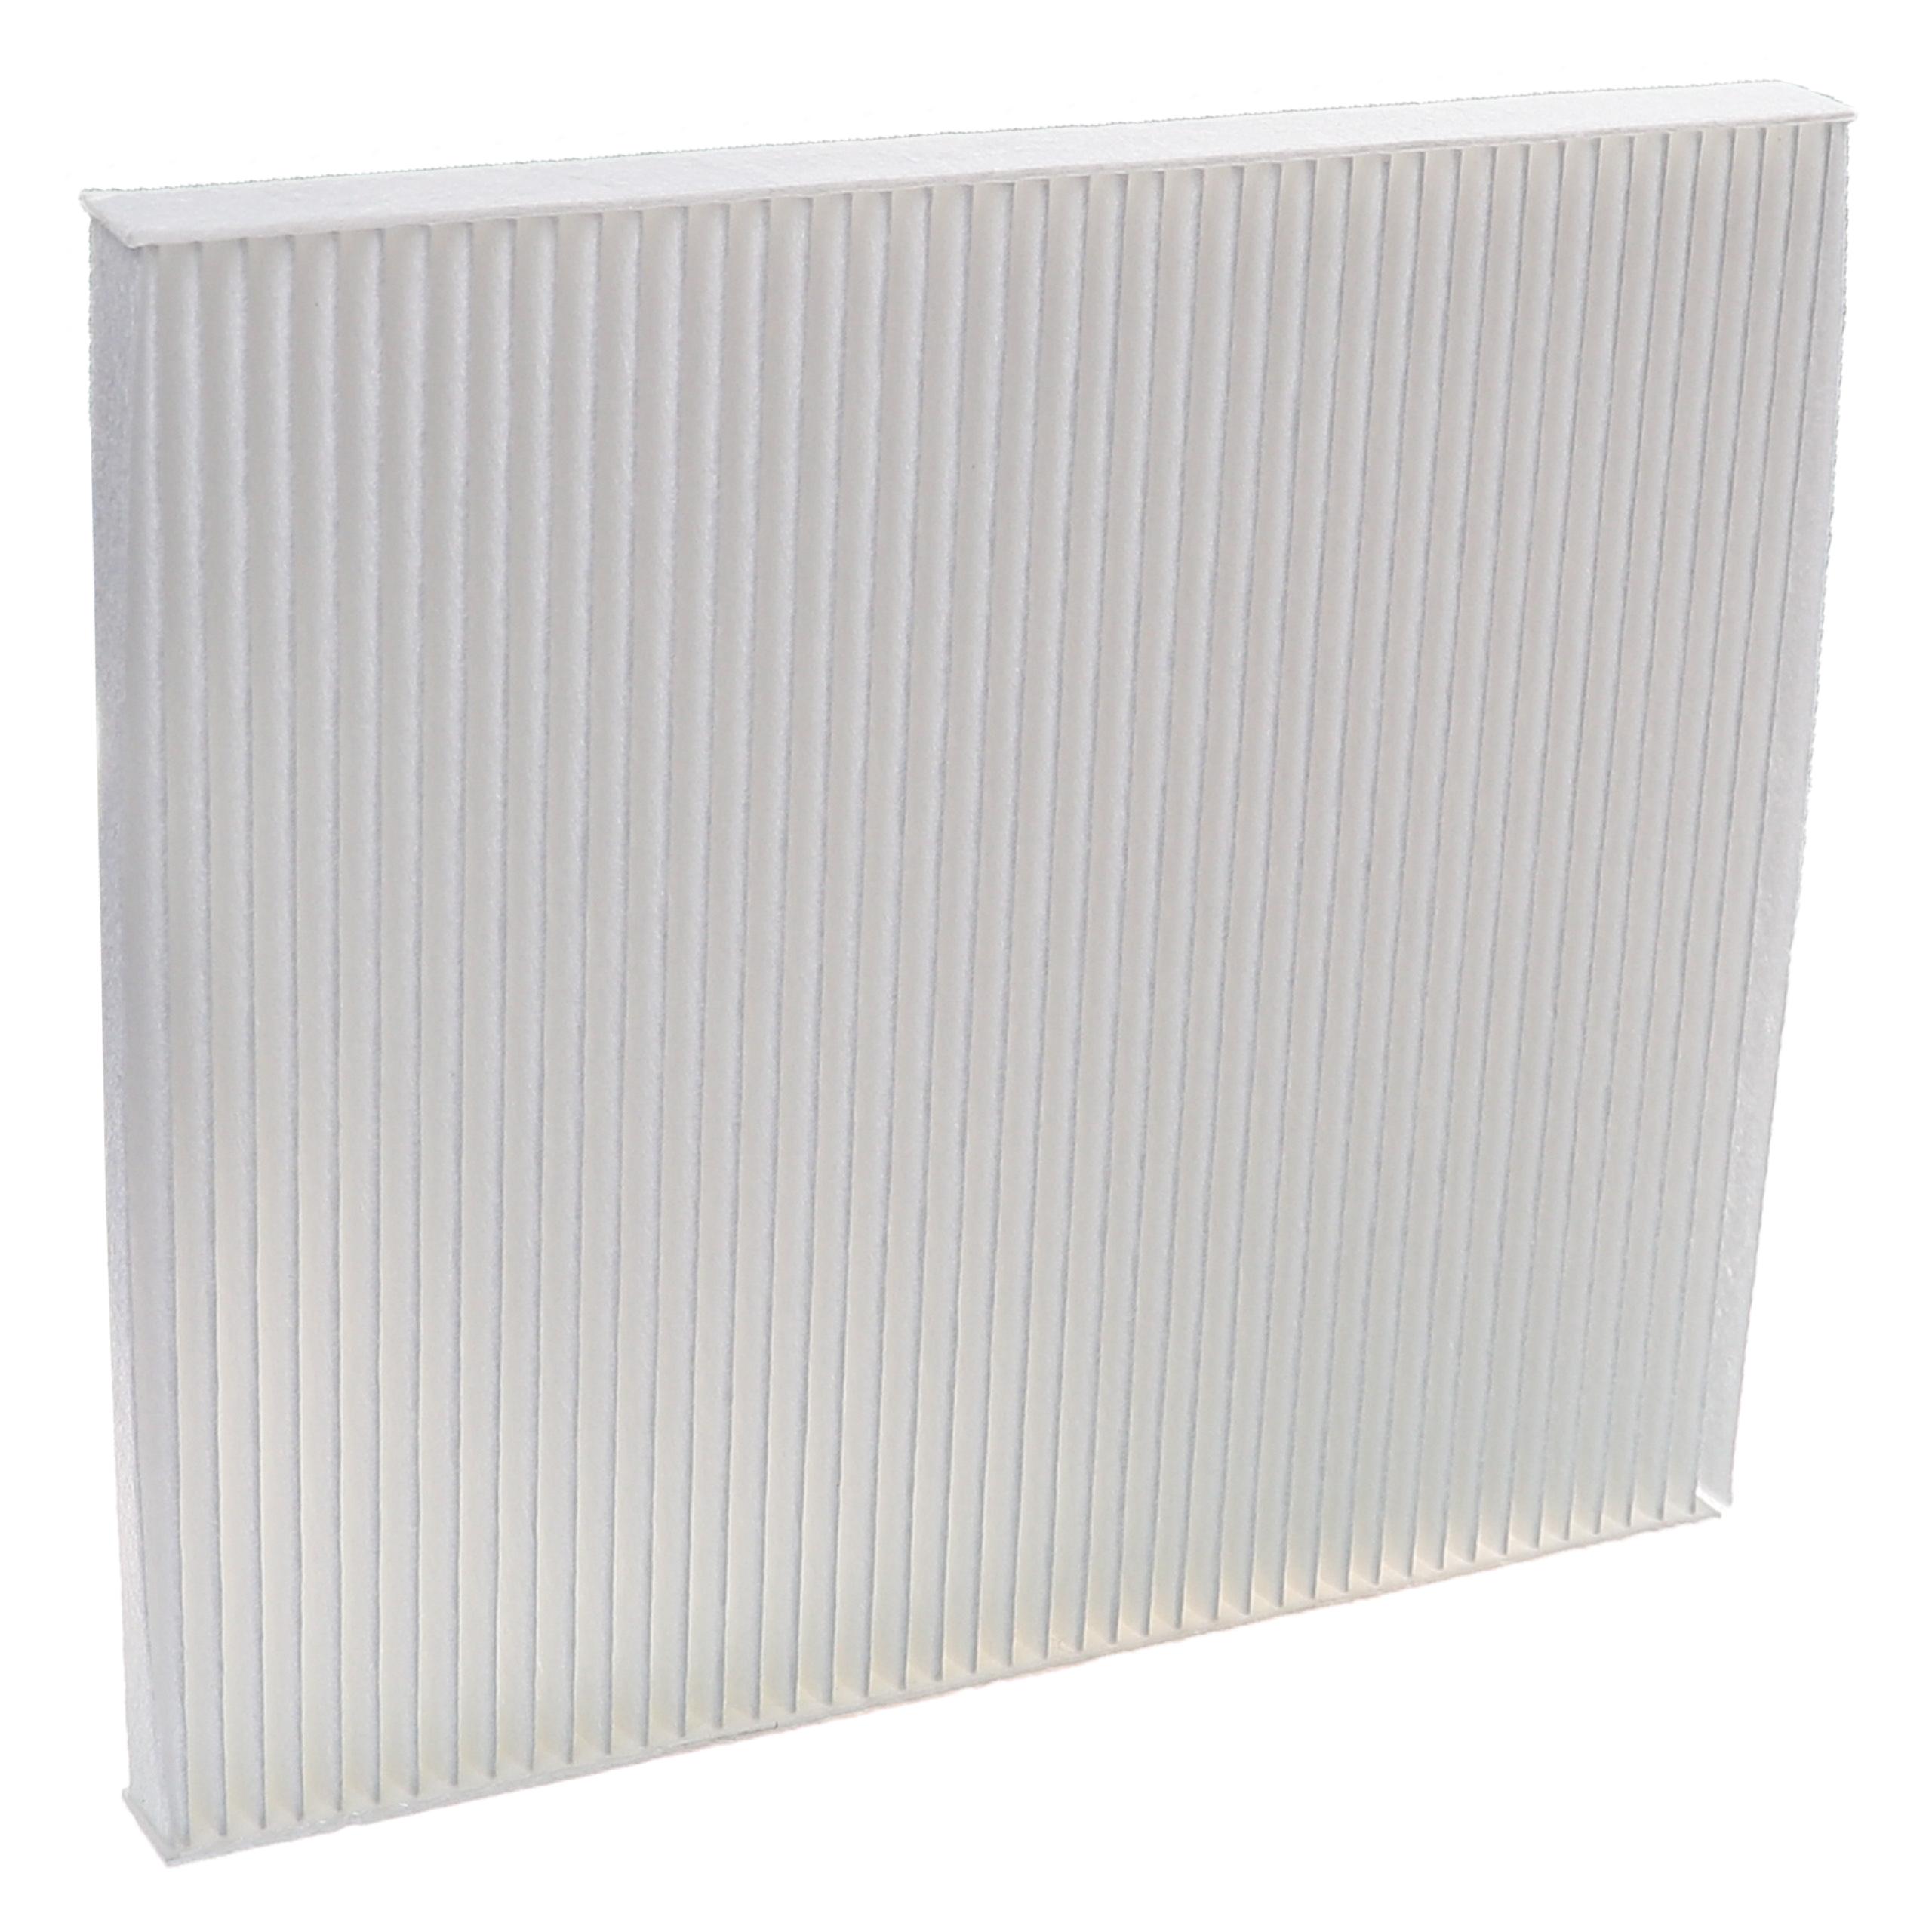 Cabin Air Filter replaces Alco Filter MS-6307 etc.